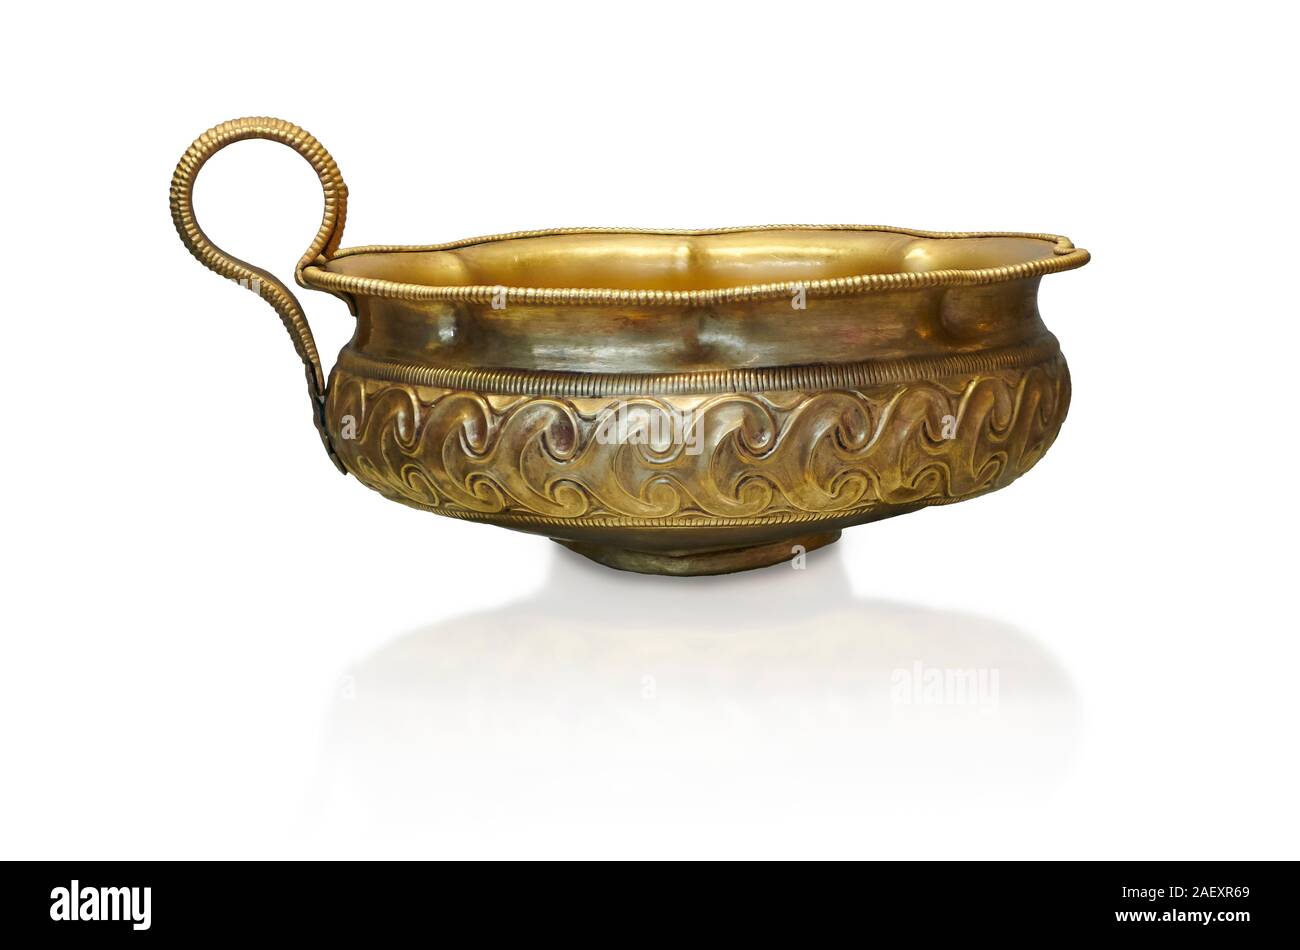 Mycenaean gold cup with ivy leaf decoration from the Mycenaean cemetery of Midea tomb 10, Dendra, Greece. National Archaeological Museum Athens Cat no Stock Photo